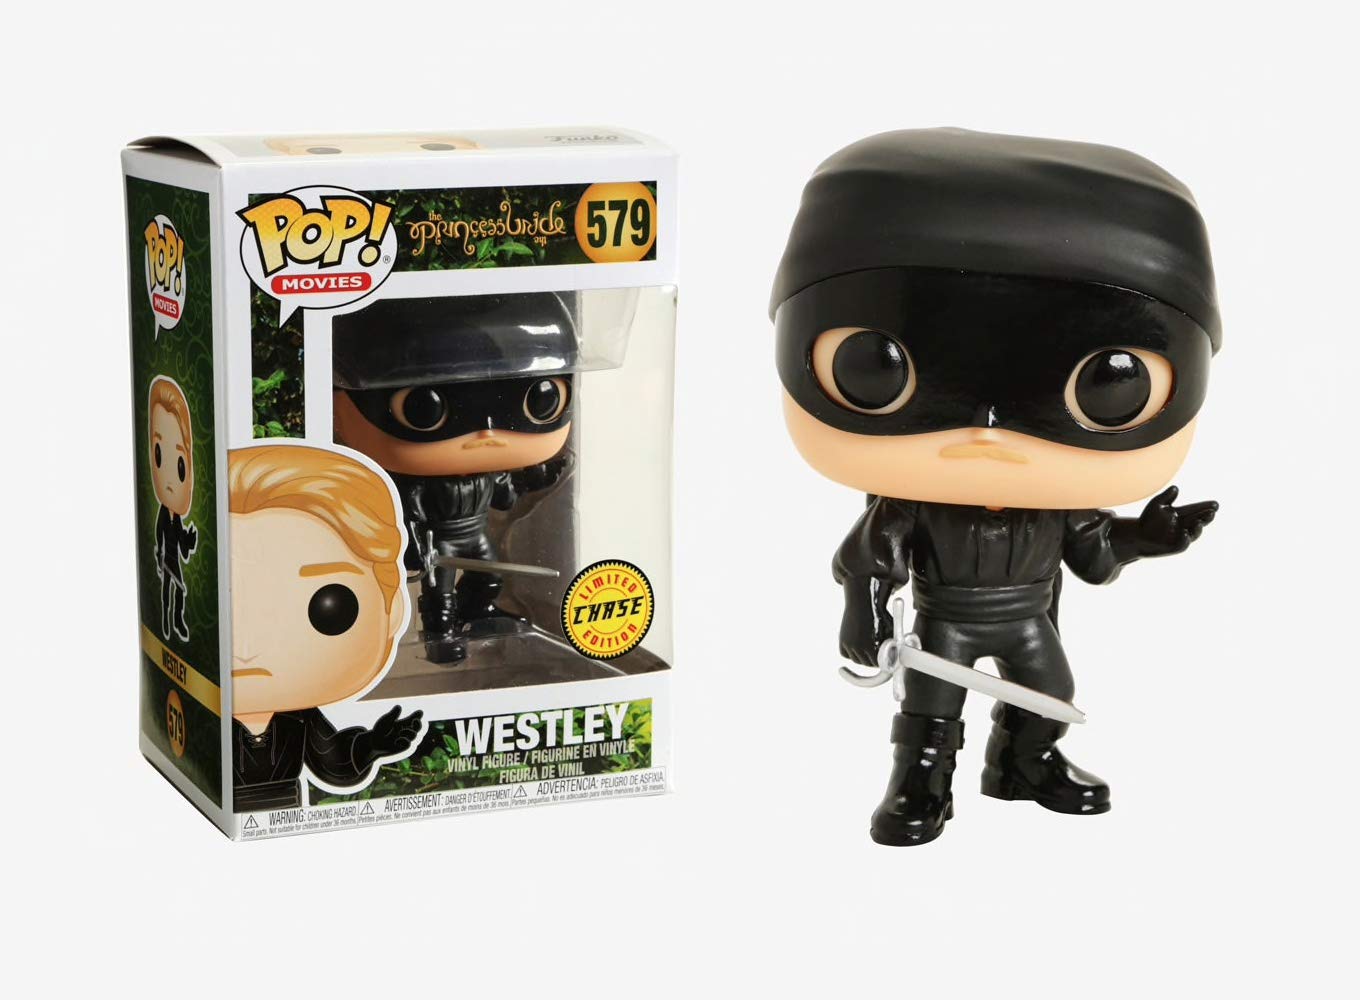 Funko POP! Movies The Princess Bride CHASE Westley #579 [Masked]